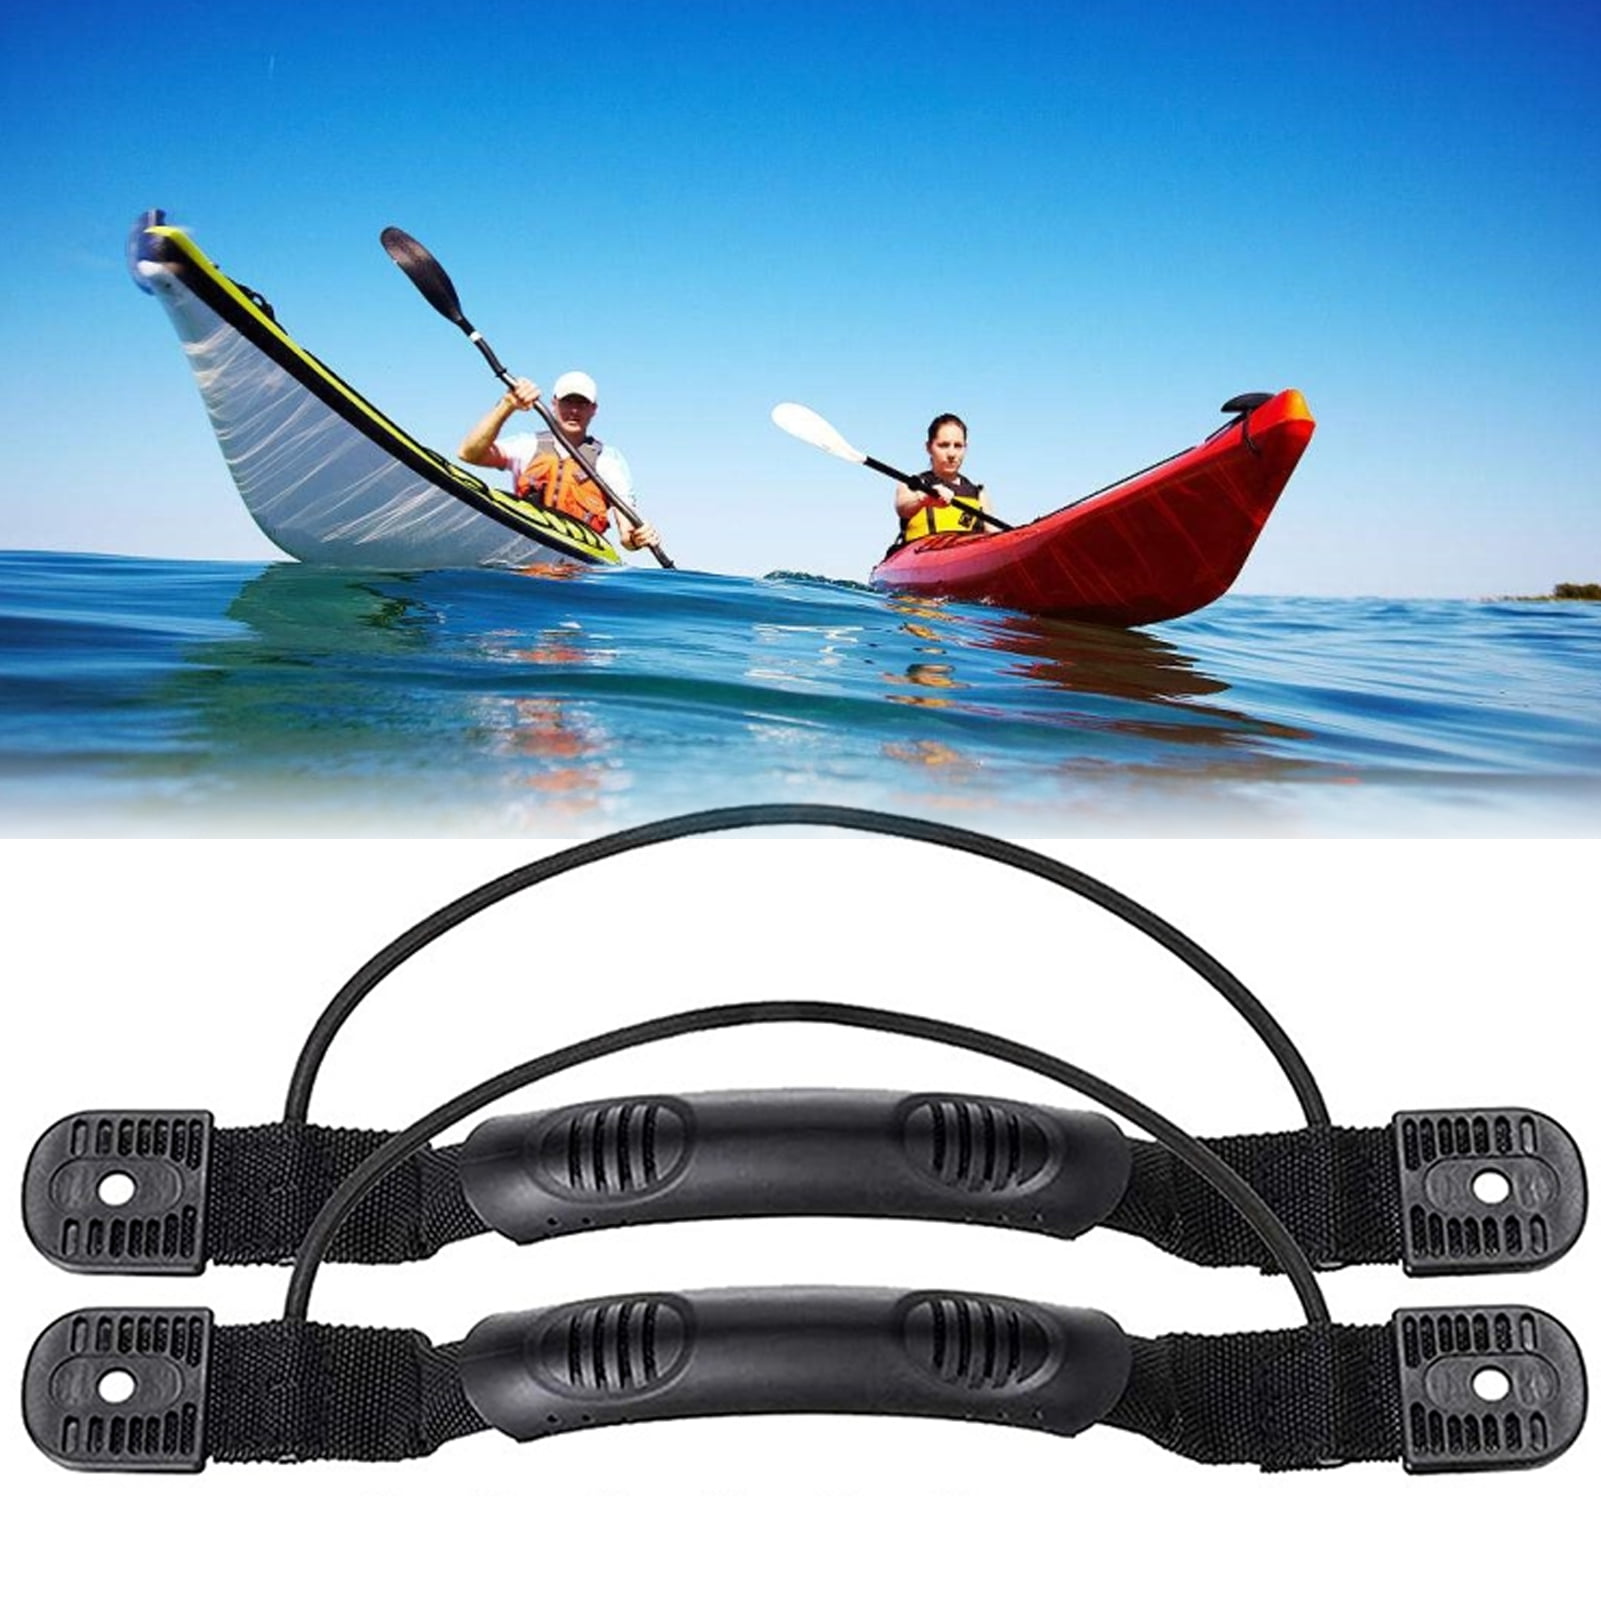 Kayak Canoe Boat Accessory Black Side Mount CARRY HANDLE with Bungee Cord 